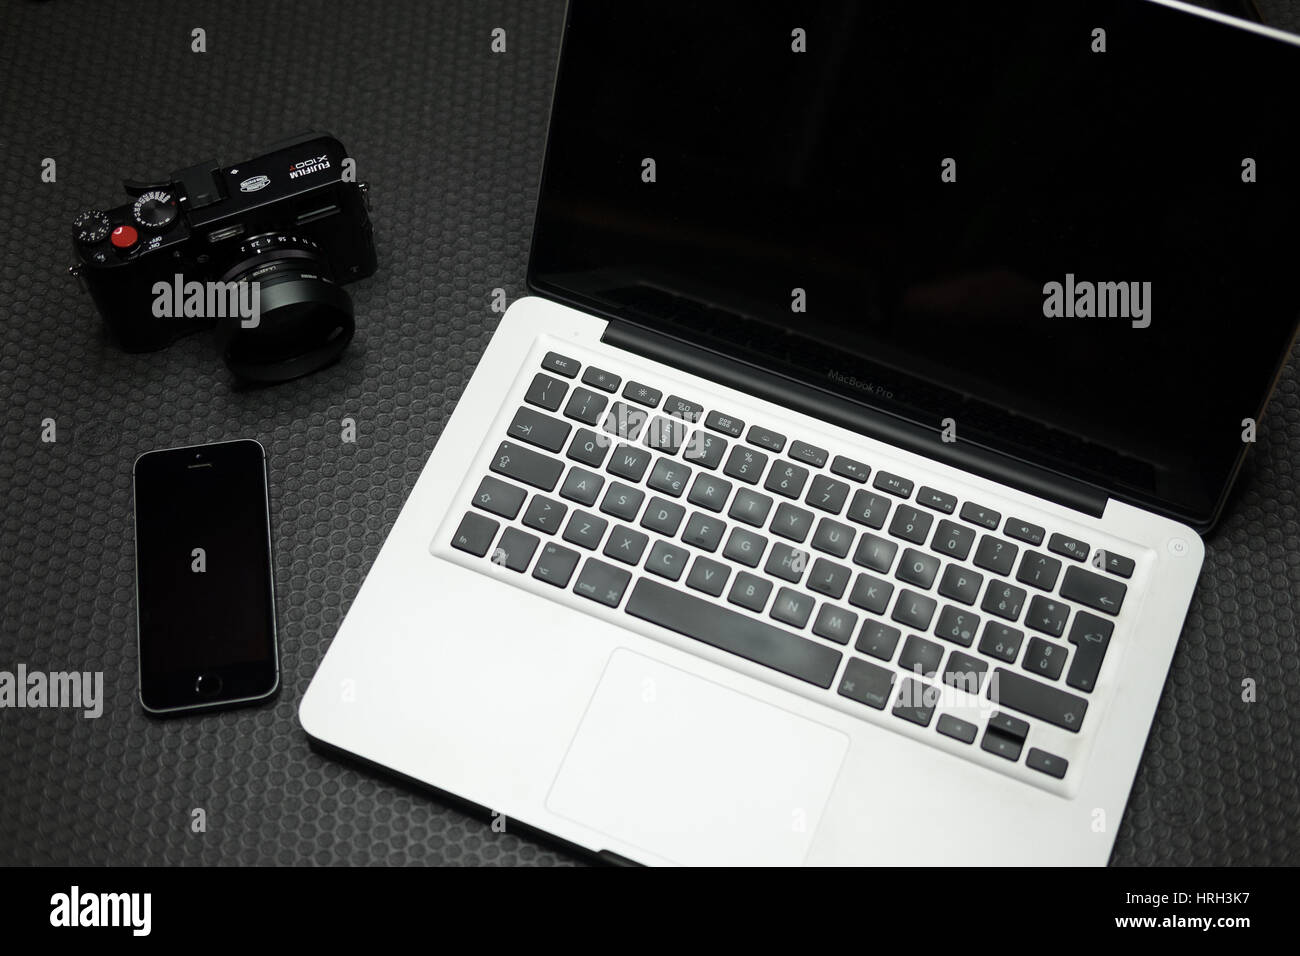 High tech laptop, smartphone and digital camera against 'stealth' backdrop. Stock Photo